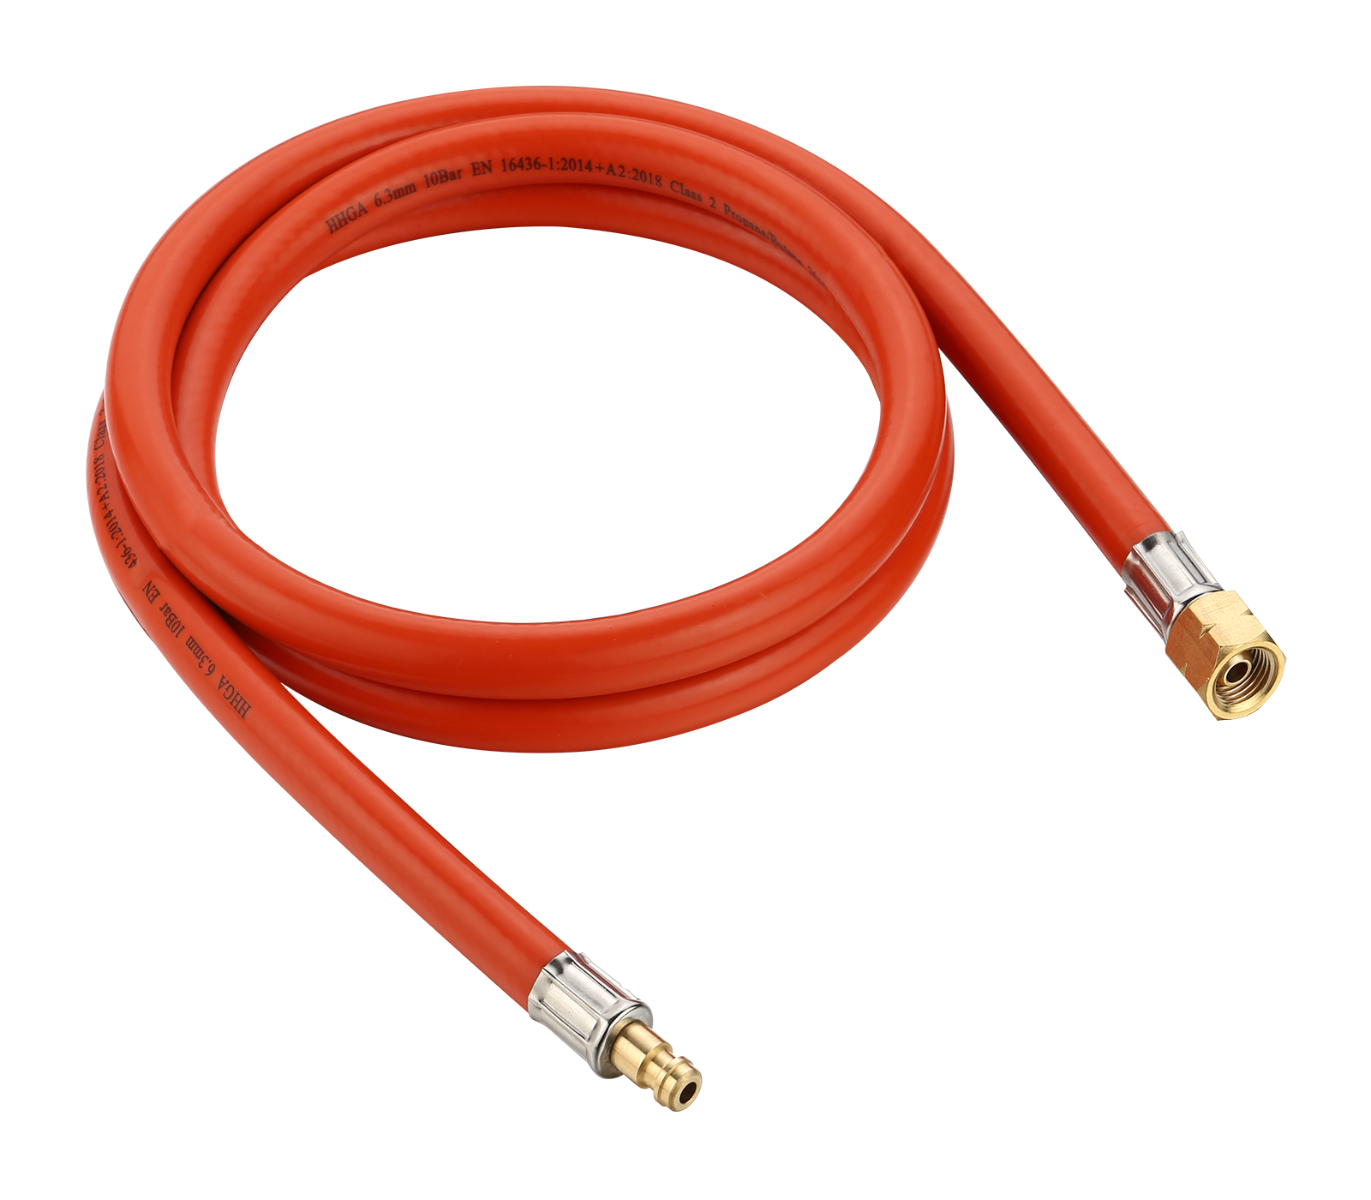 Hose 150cm with quick release